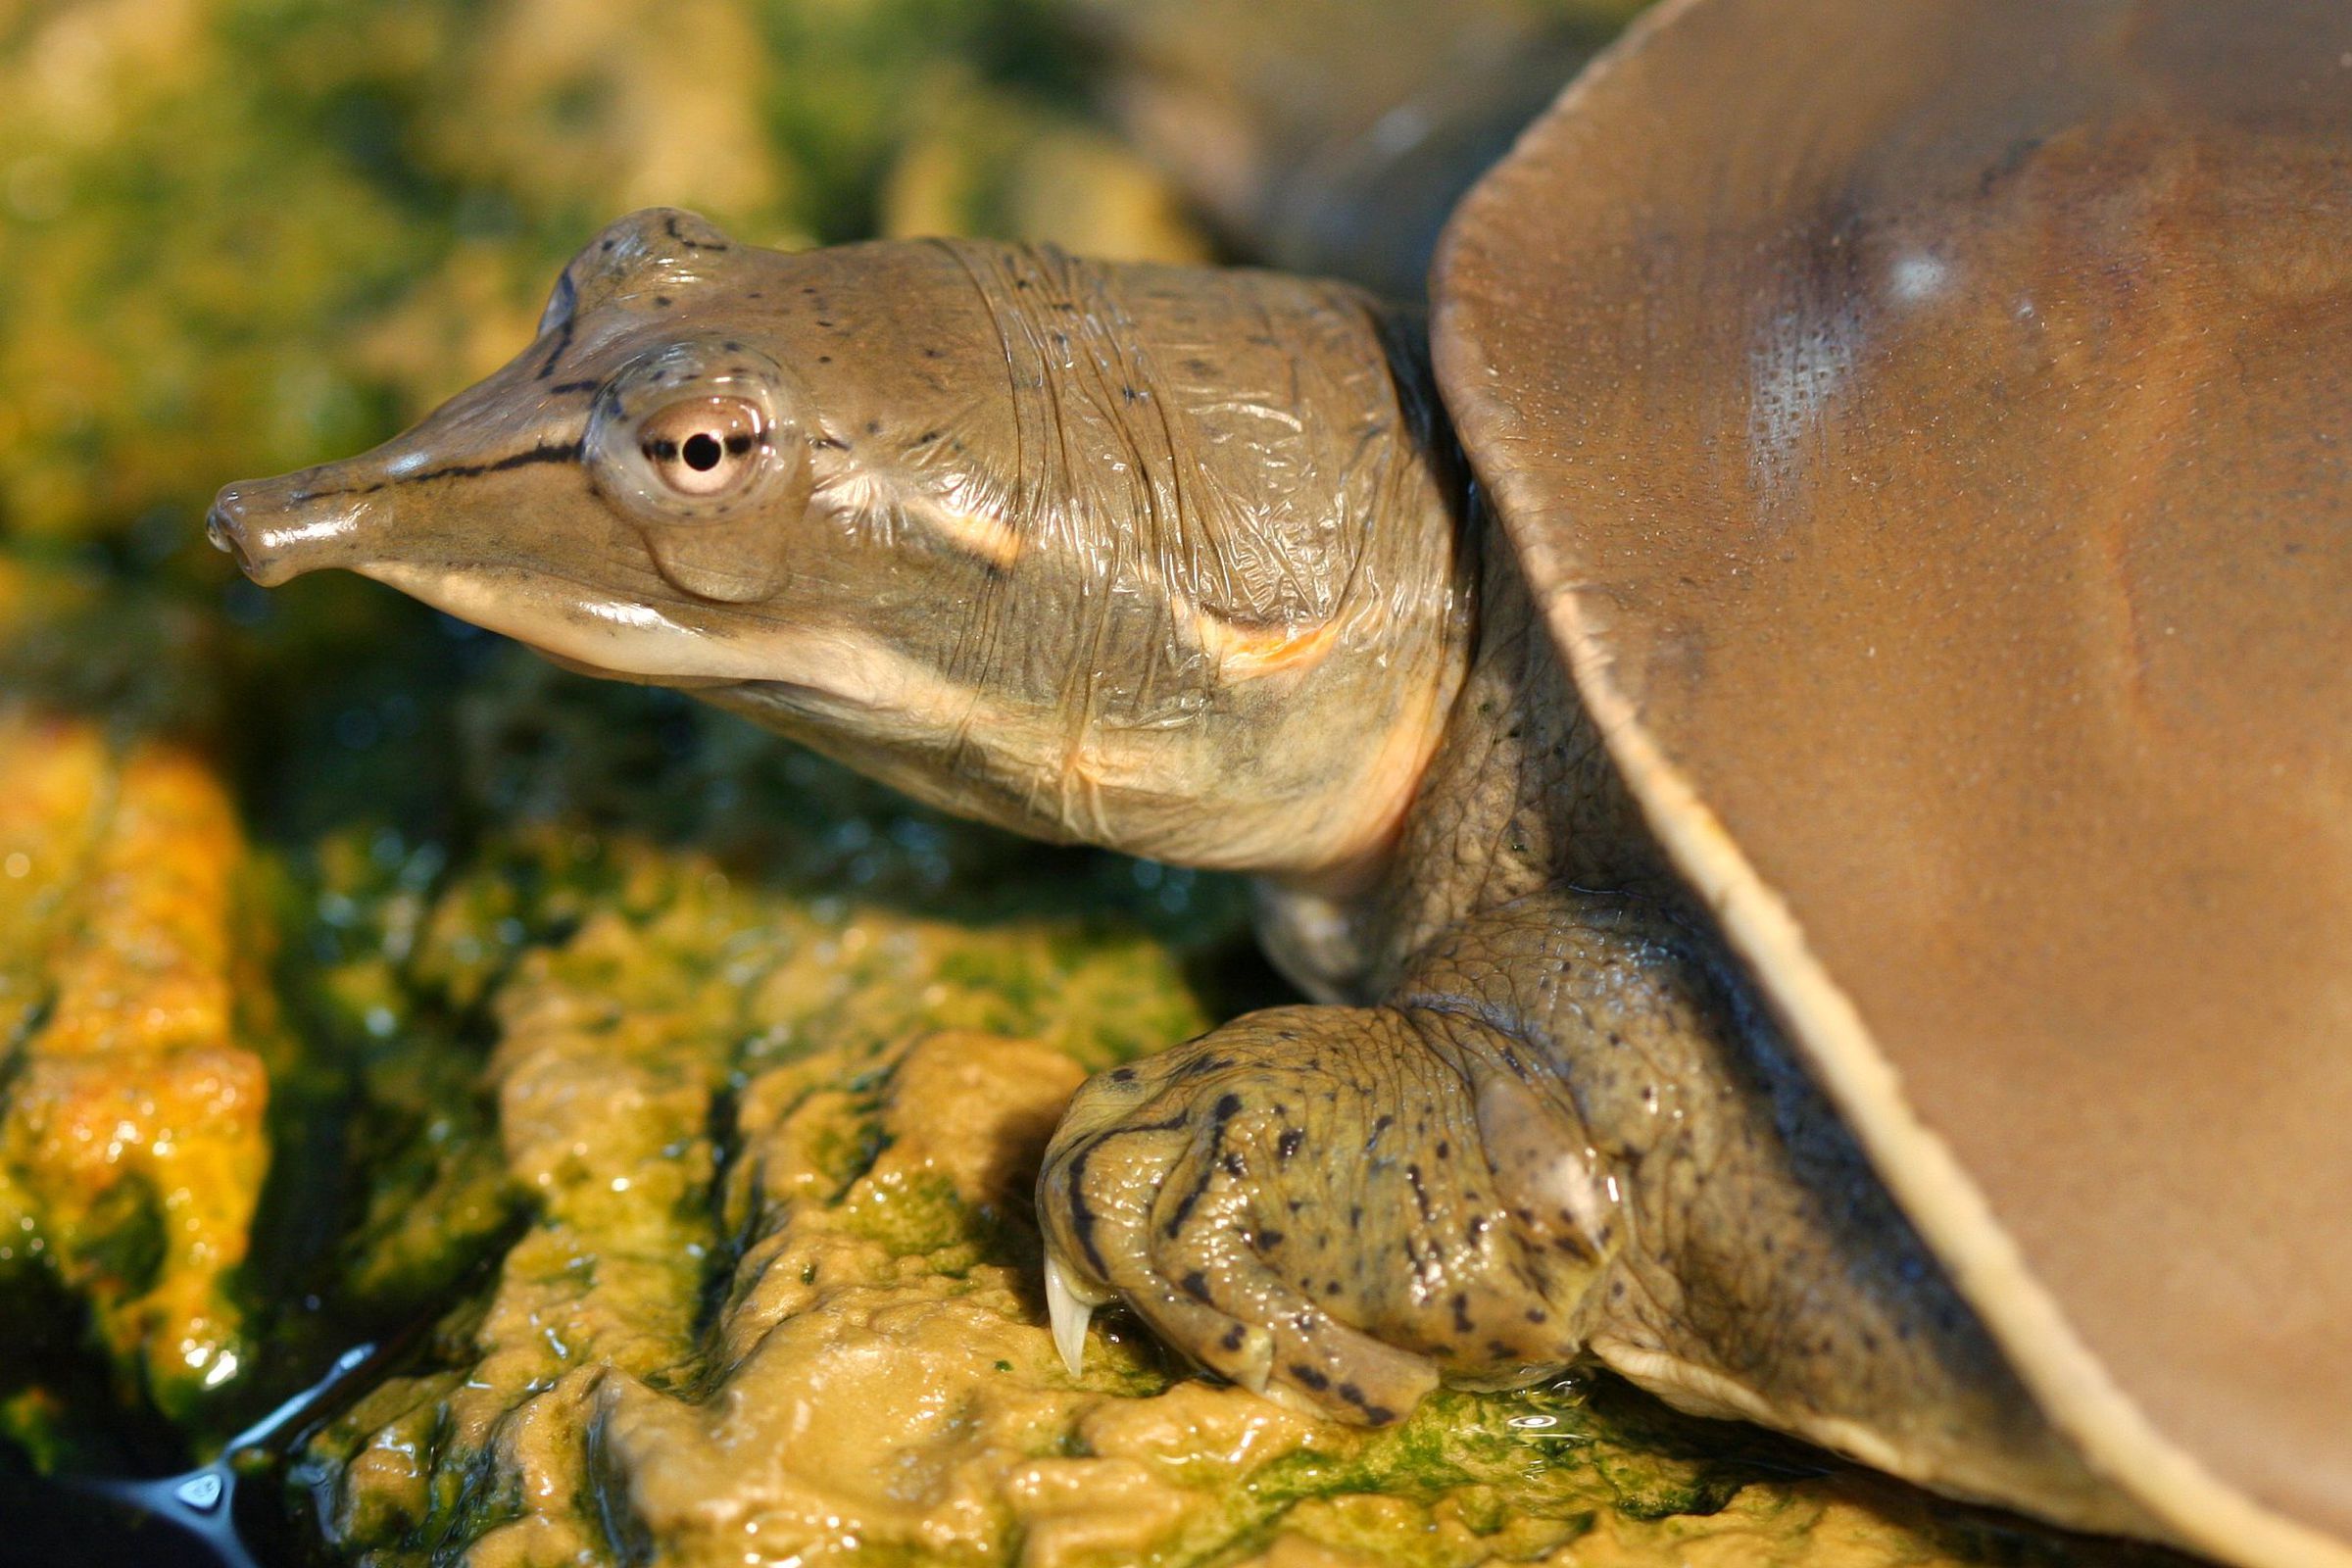 A spiny softshell turtle, the same species used in the vibrator study.